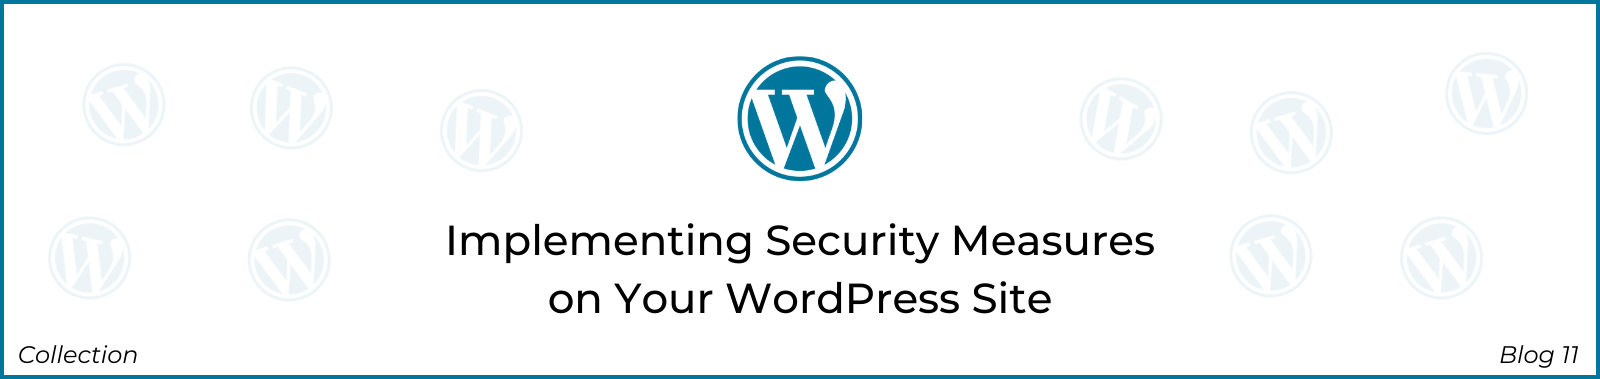 Implementing Security Measures on Your WordPress Site